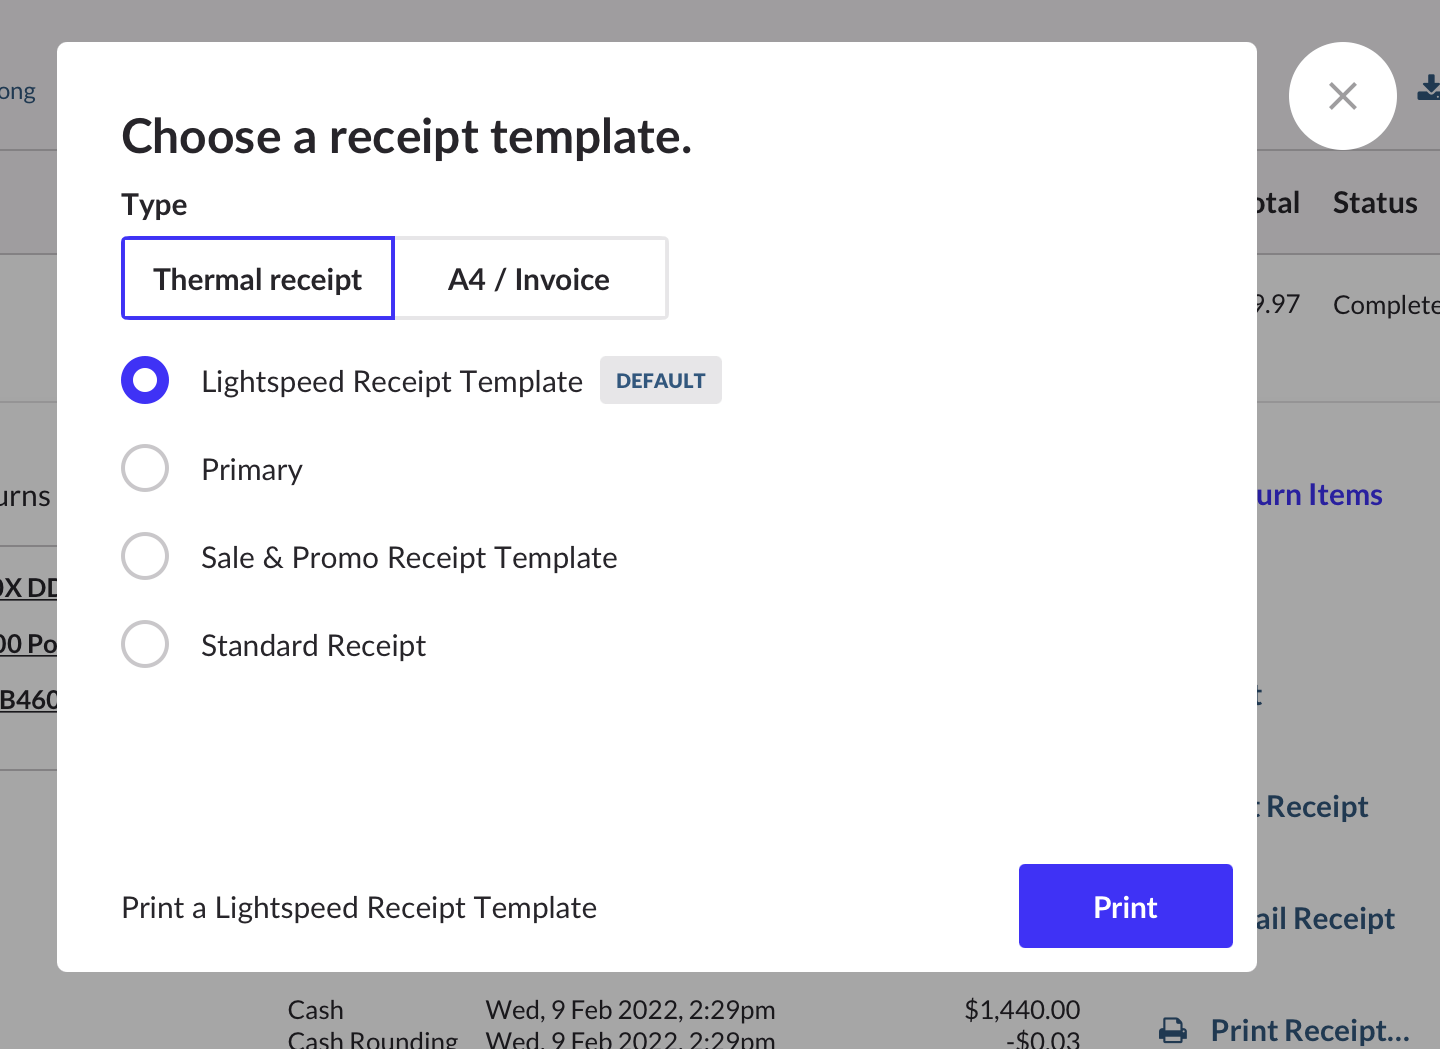 Pop-up asking to Choose a receipt template and Print the receipt.